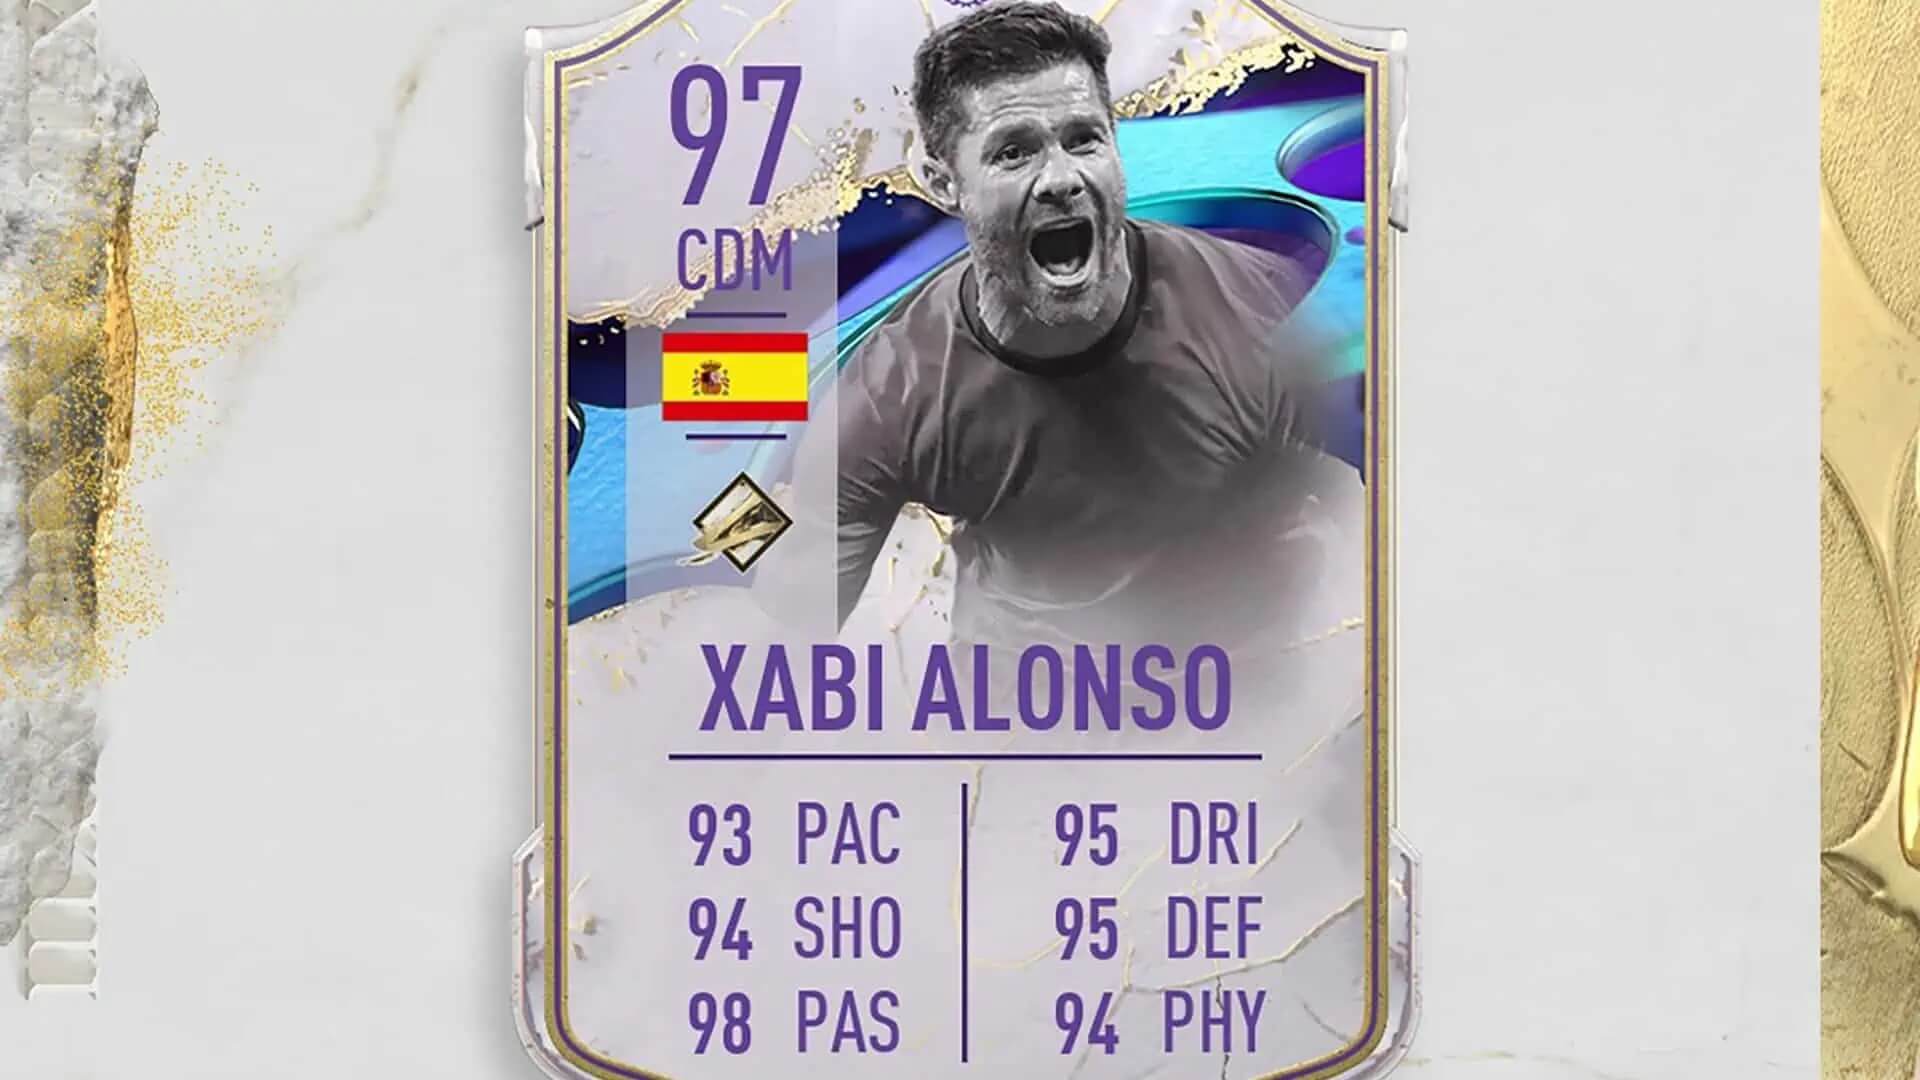 FIFA 23: How to Complete the Cover Star Icon Xabi Alonso SBC